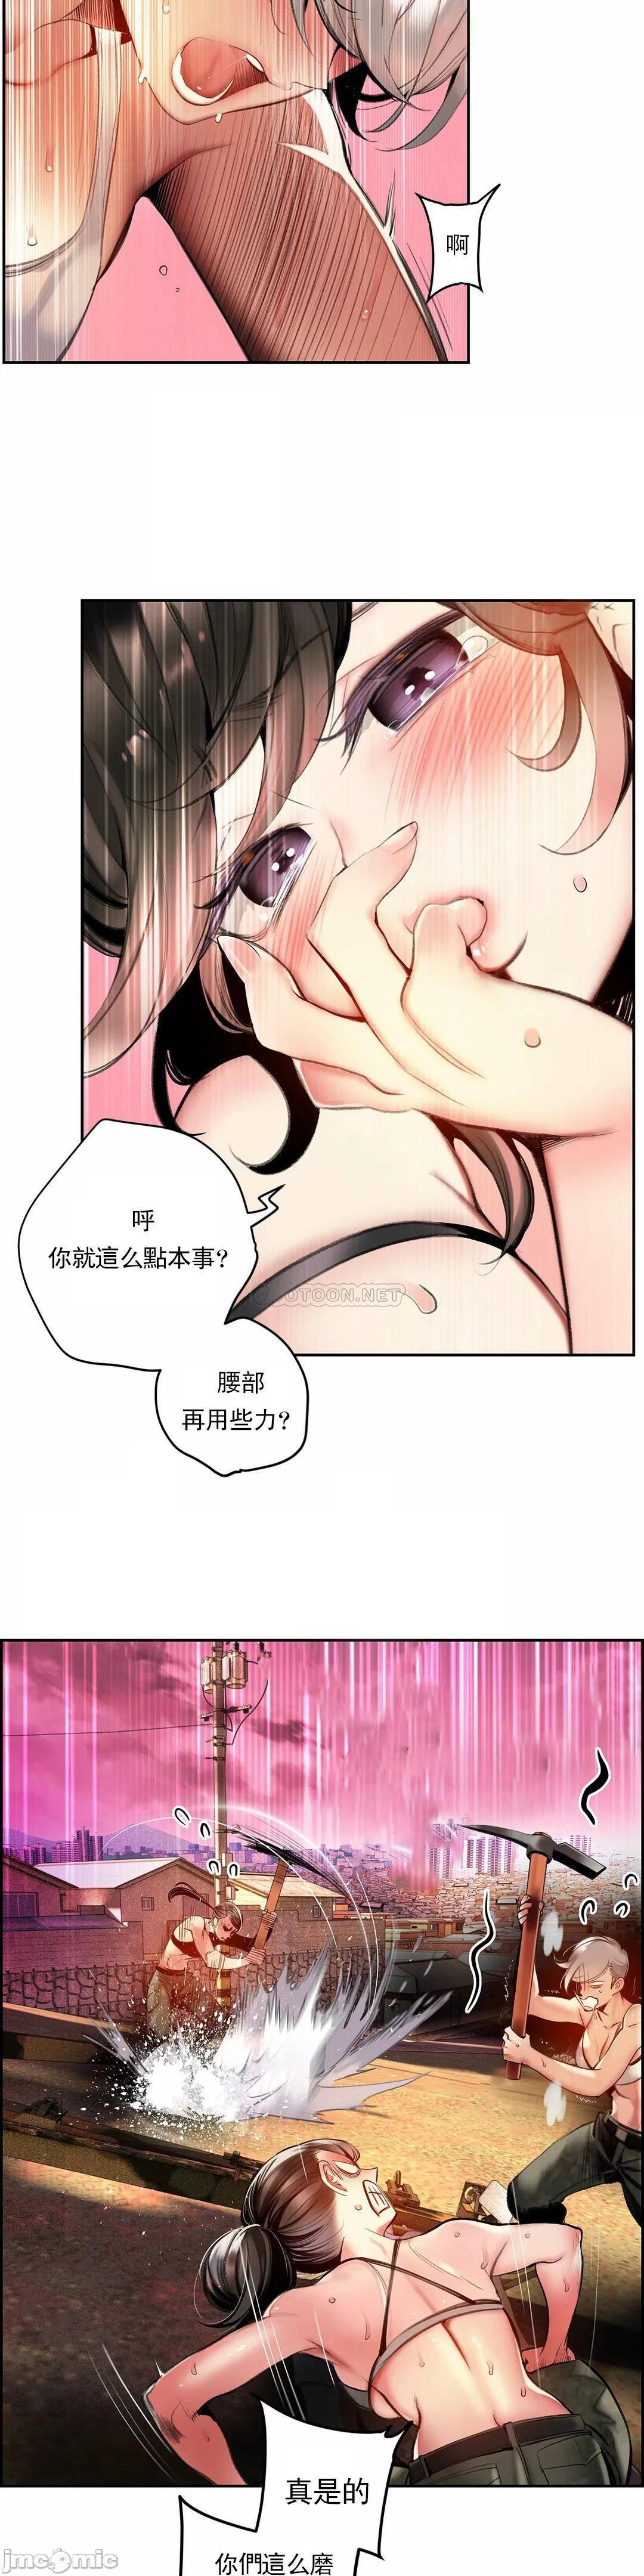 [Juder] Lilith`s Cord (第二季) Ch.77-93 end [Chinese] 336